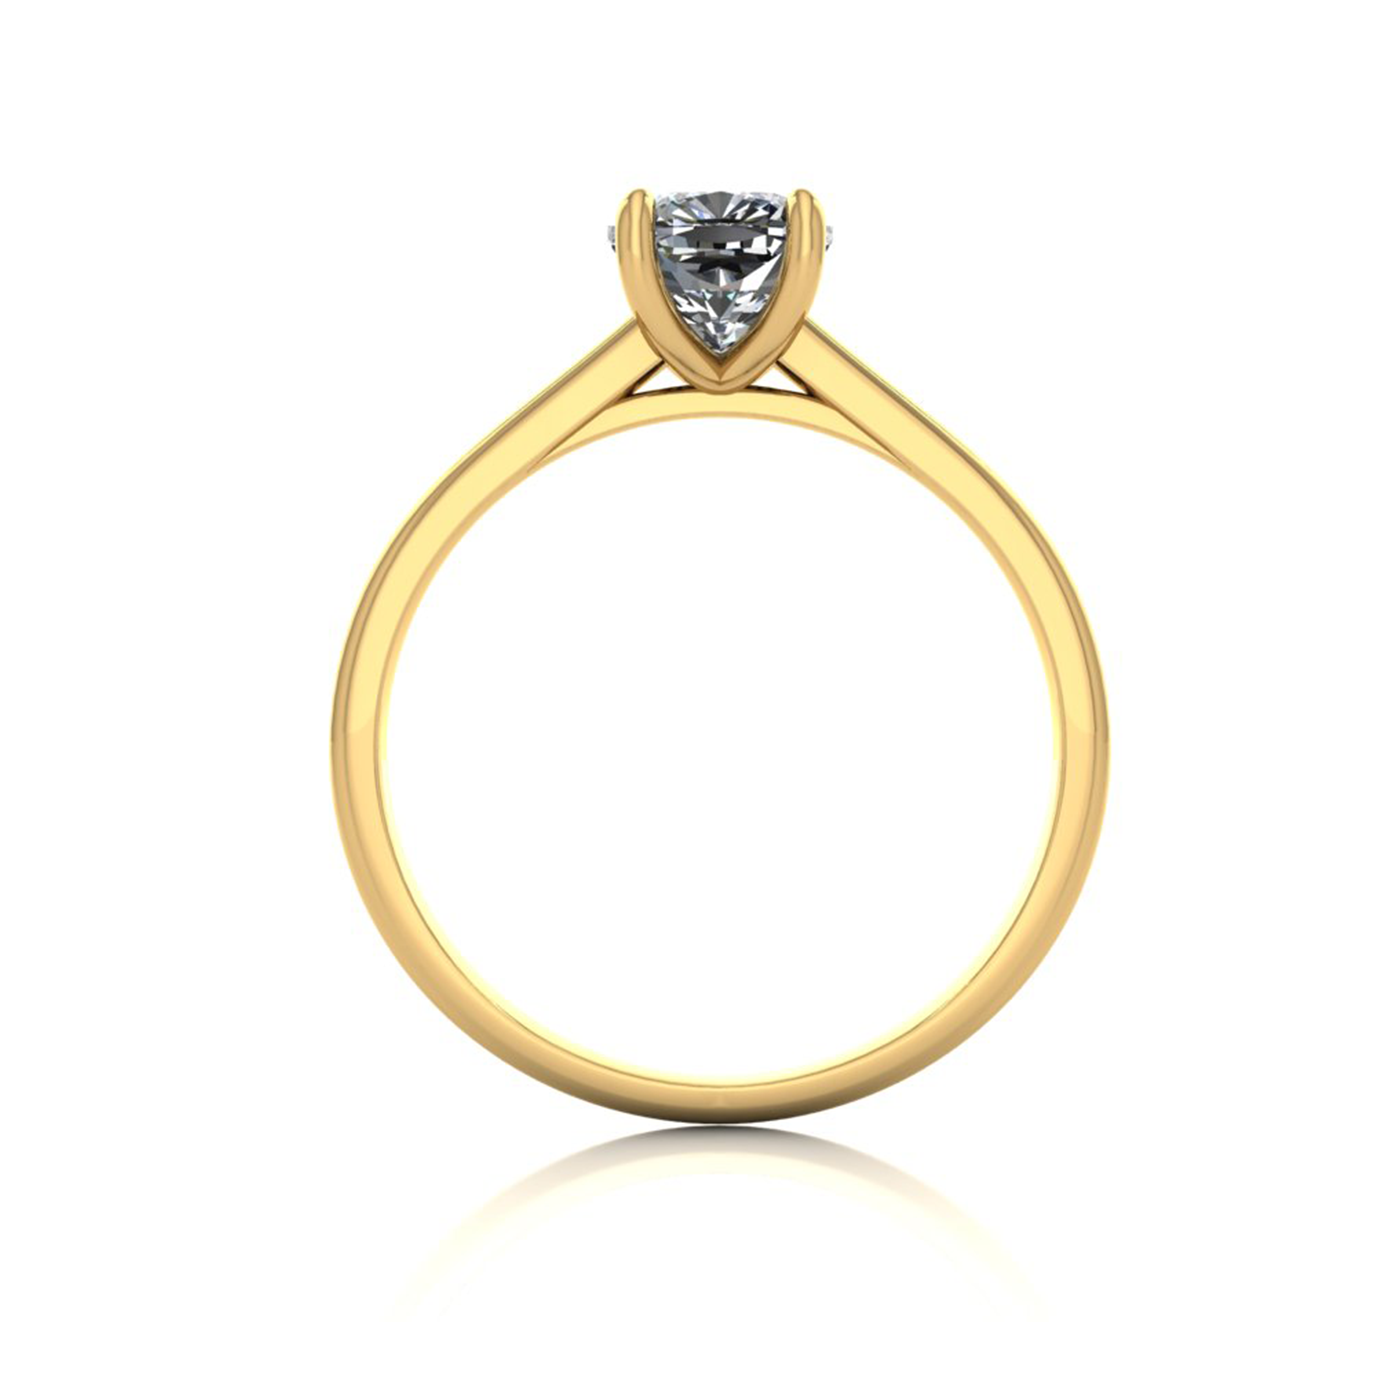 18k yellow gold 1.0ct 4 prongs solitaire cushion cut diamond engagement ring with whisper thin band